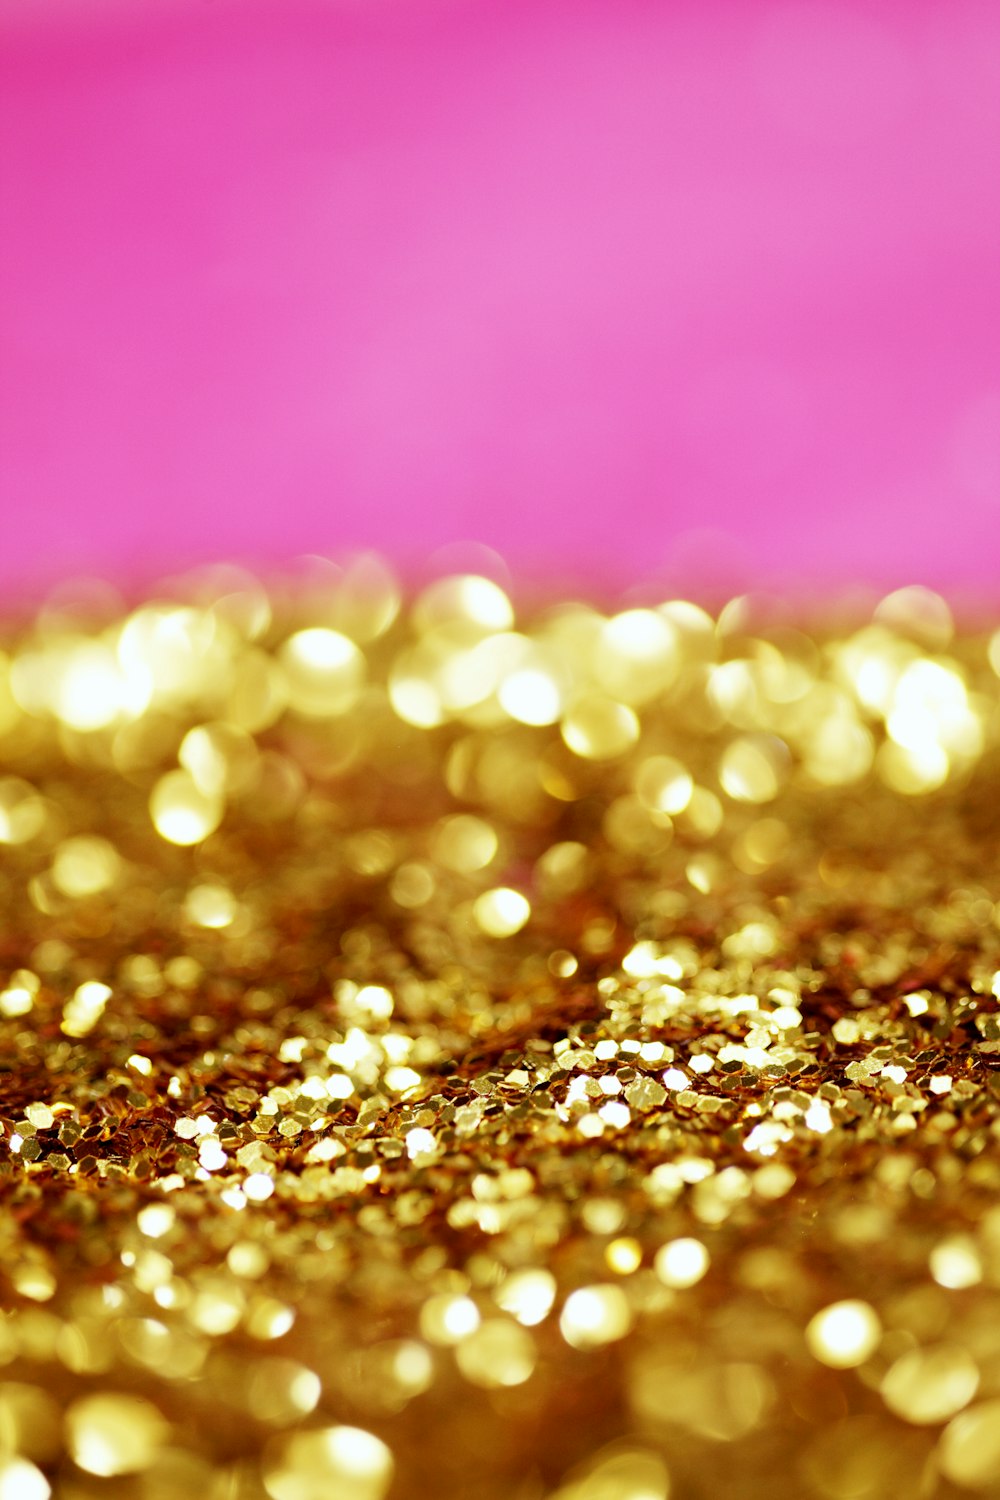 Pink And Gold Pictures | Download Free Images on Unsplash